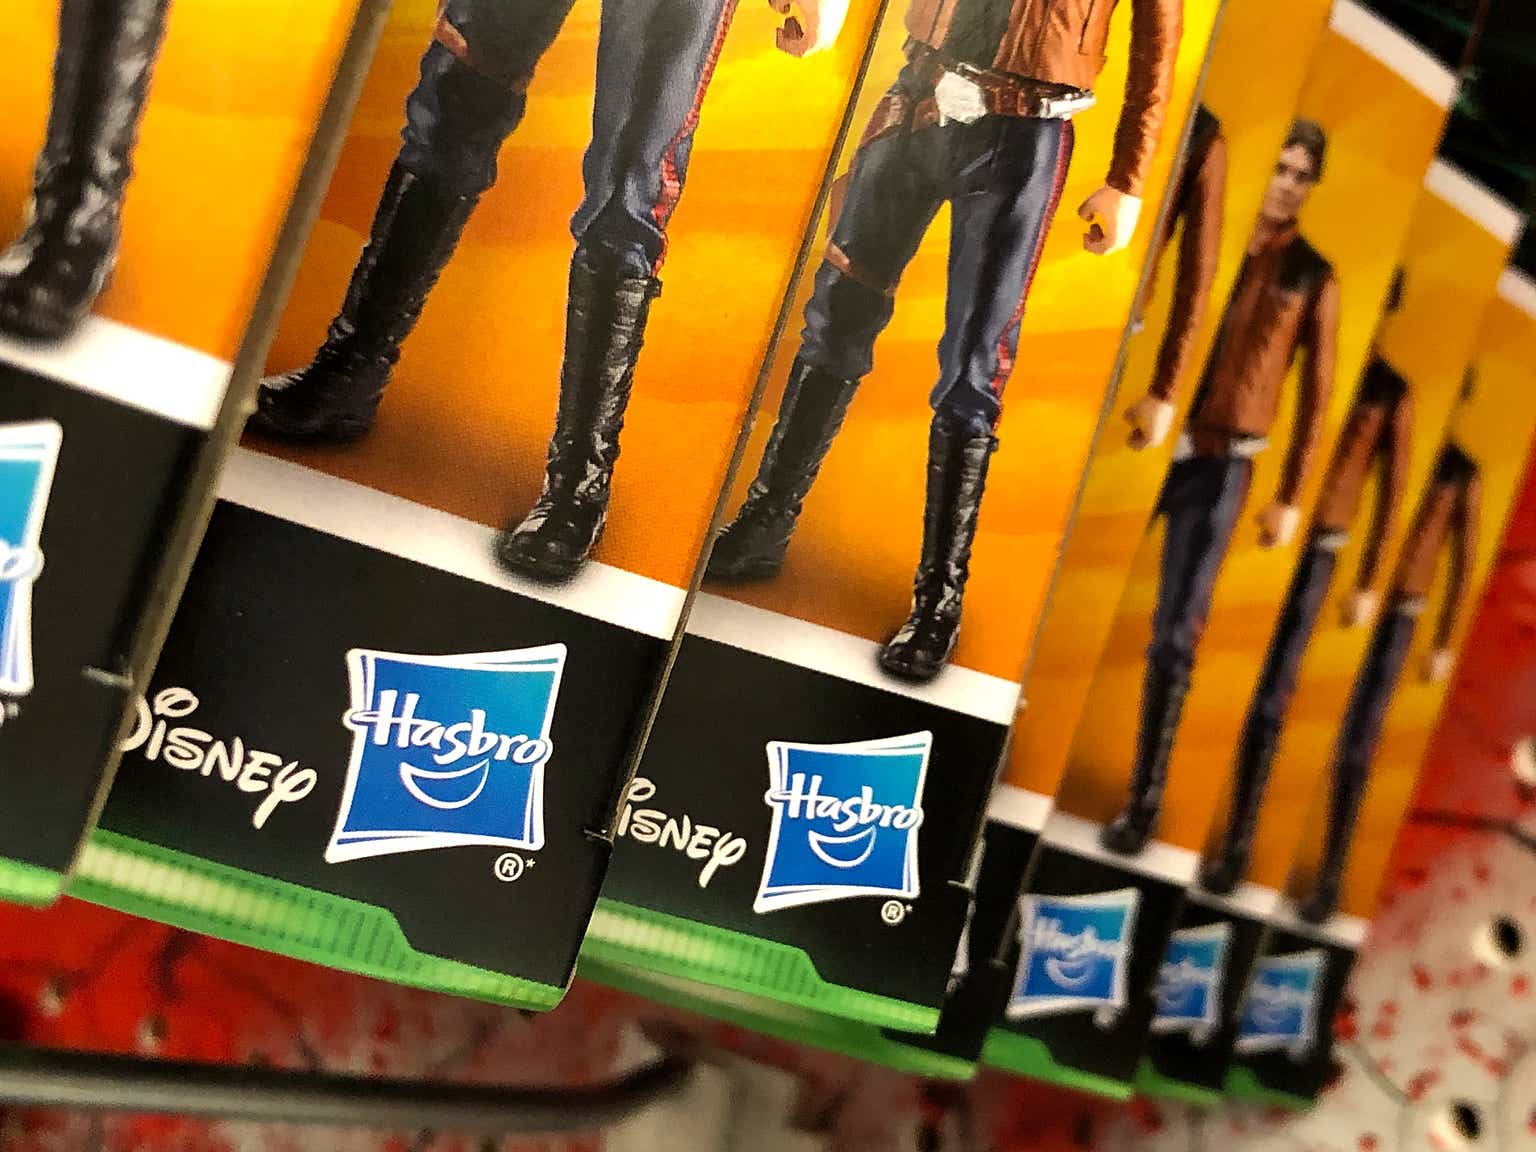 Hasbro stock hits all-time high thanks to Disney dolls